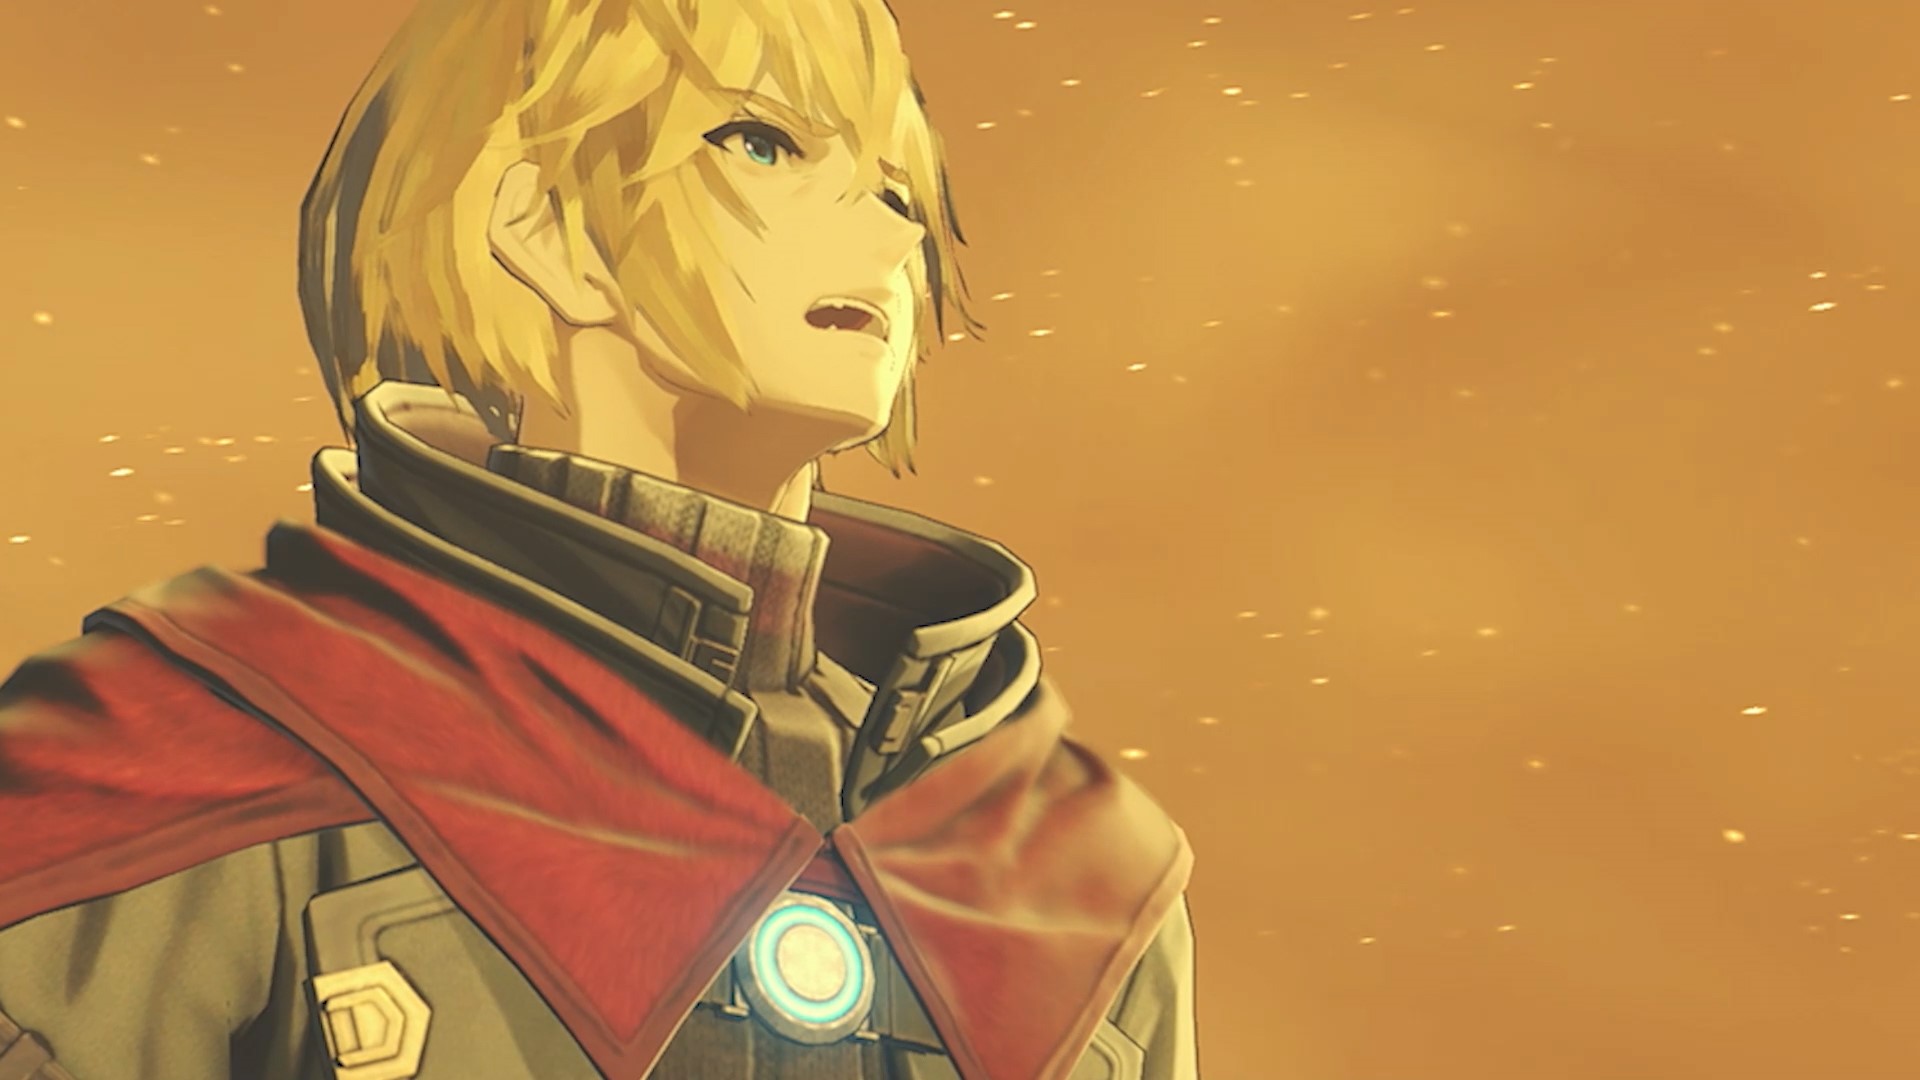 The official Xenoblade Chronicles 3 site has a ton of info